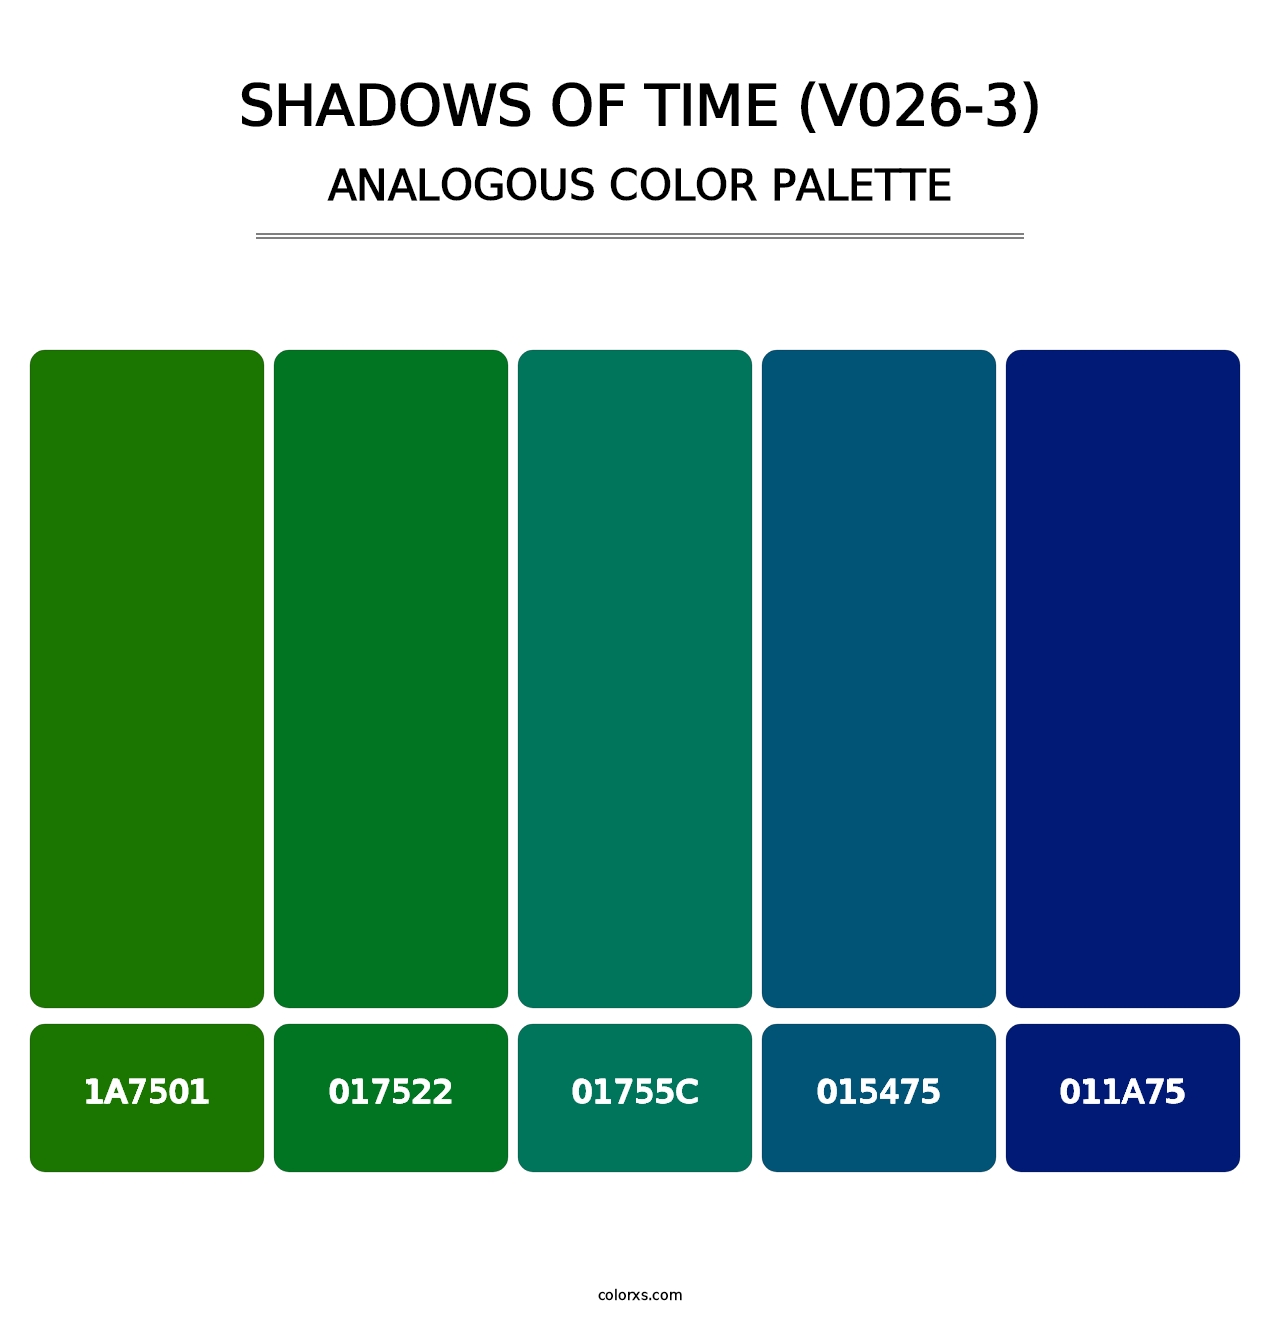 Shadows of Time (V026-3) - Analogous Color Palette